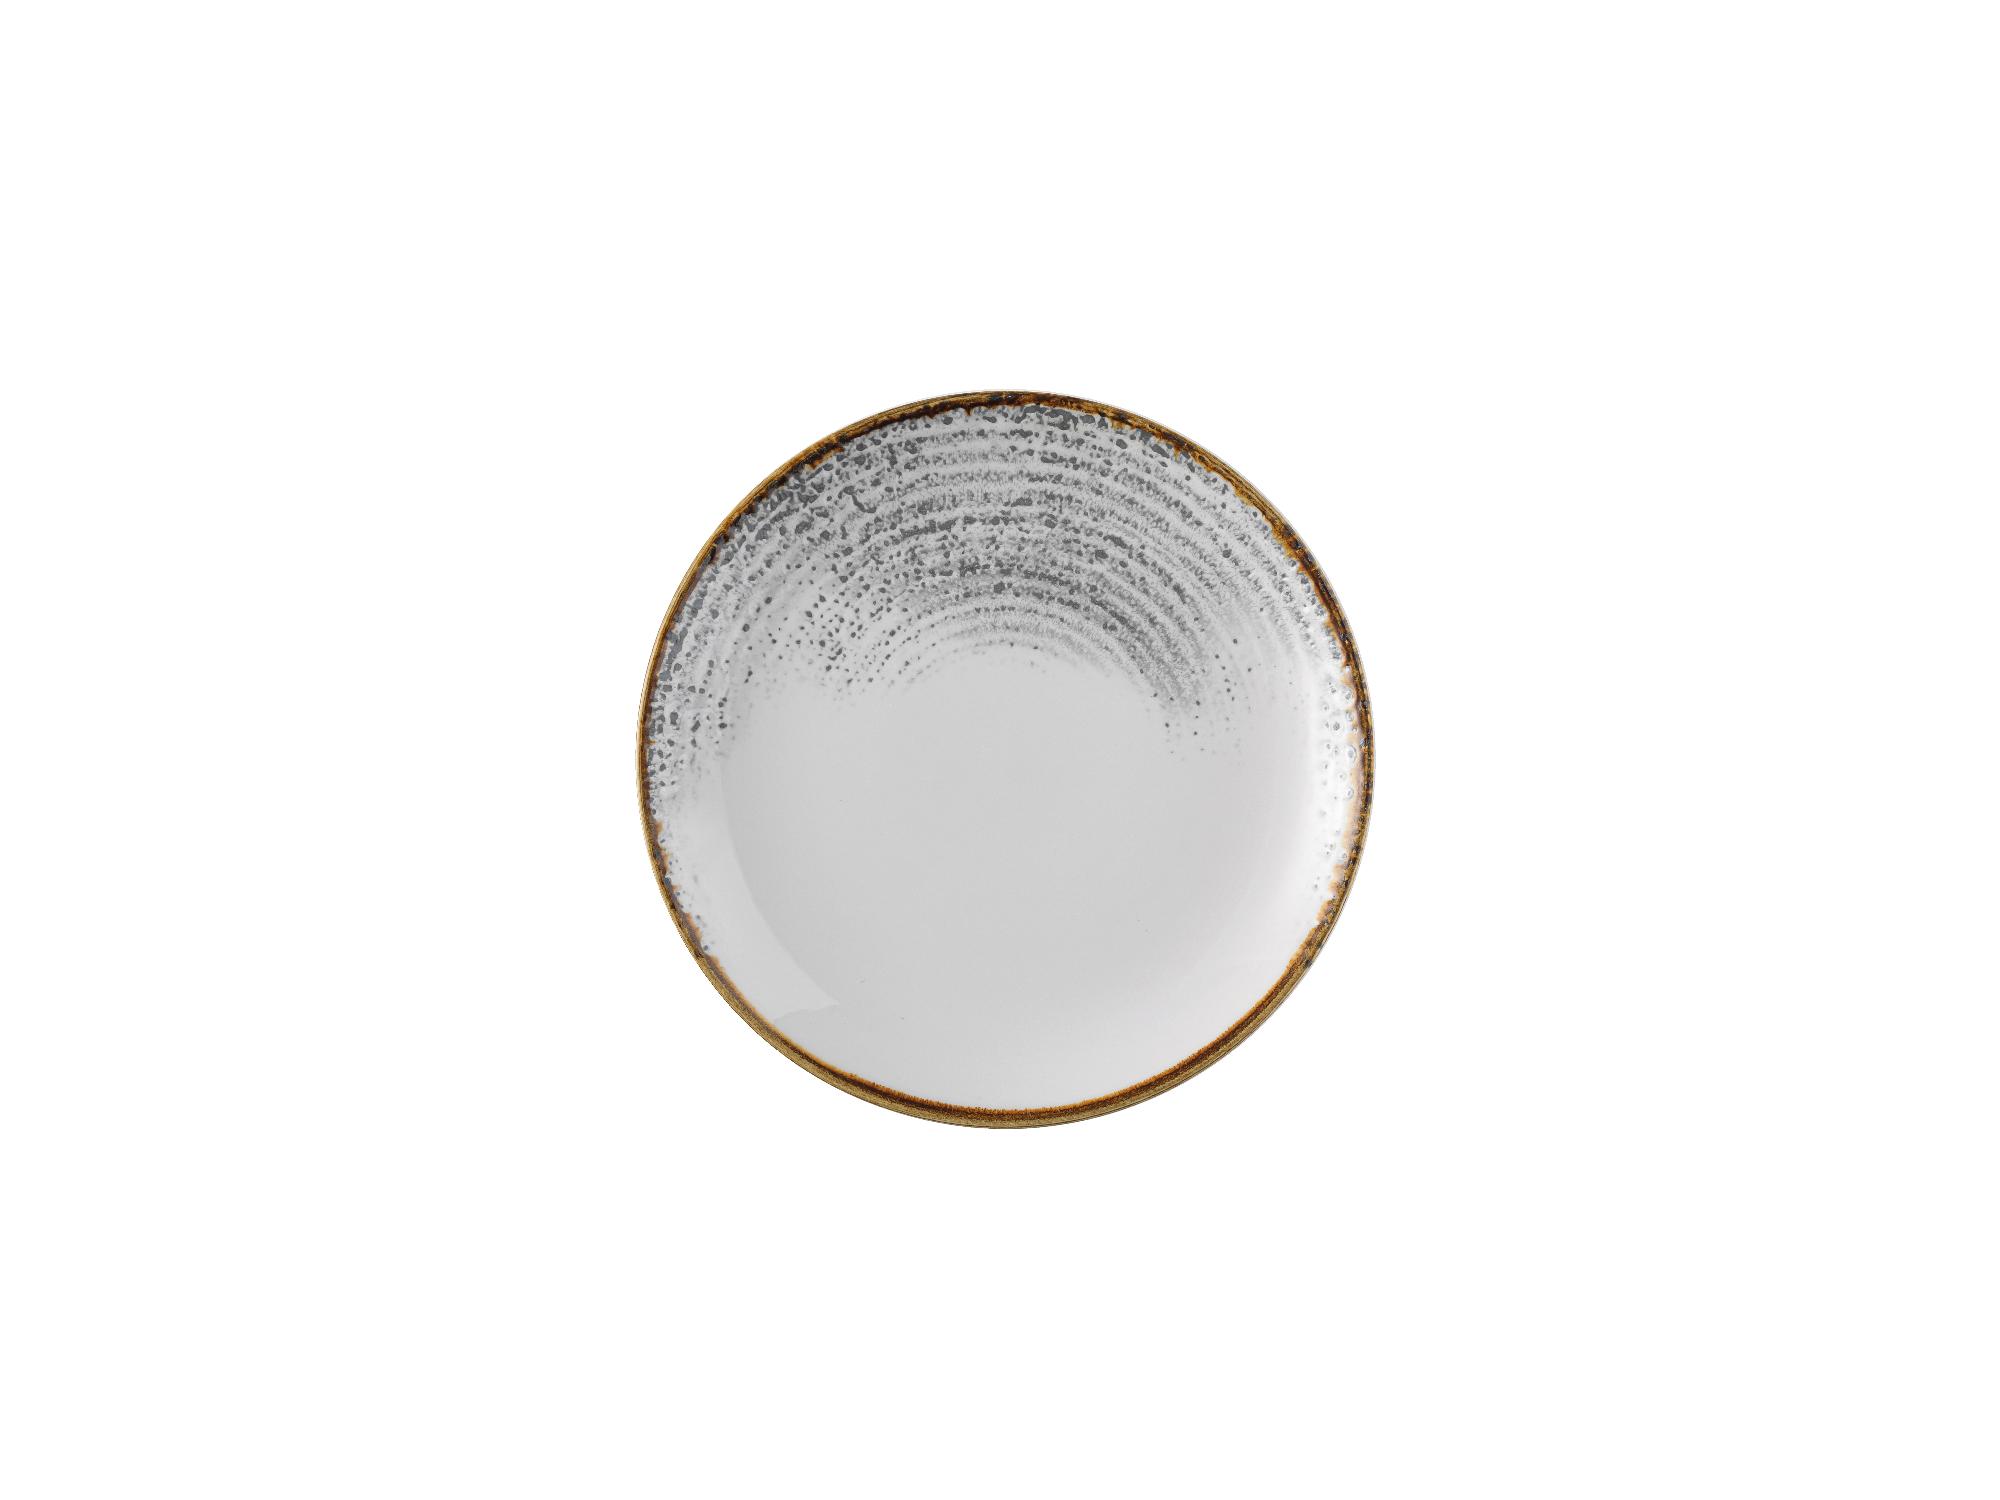 Homespun Accents Jasper Grey coupe plate, 260mm